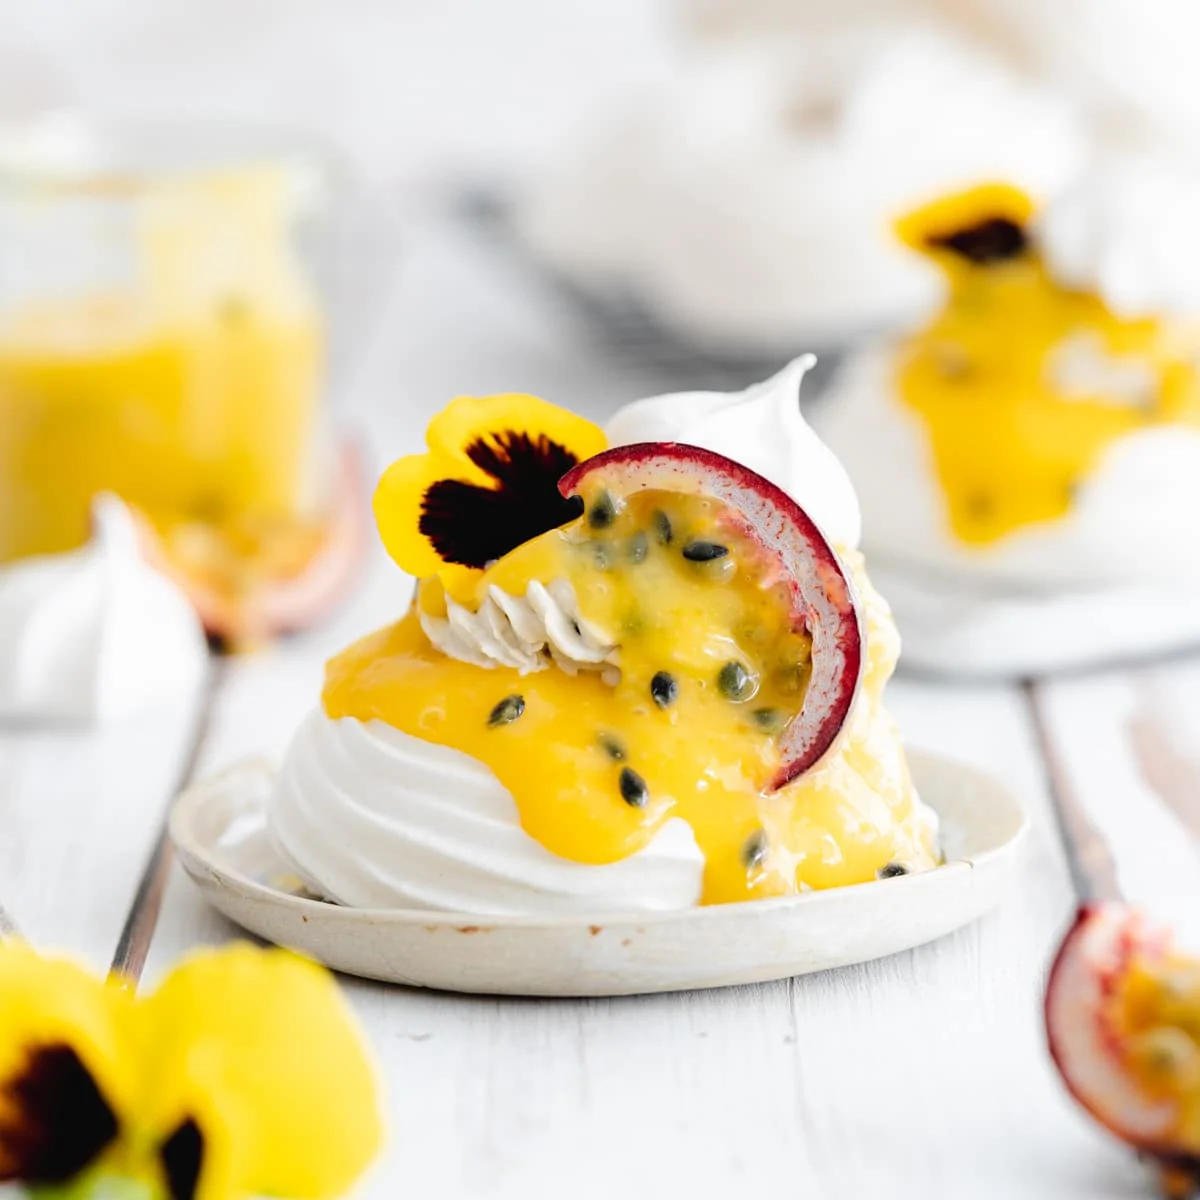 Vegan Meringue Nests with Lemon Passion Fruit Curd by Addicted to Dates // FoodNouveau.com